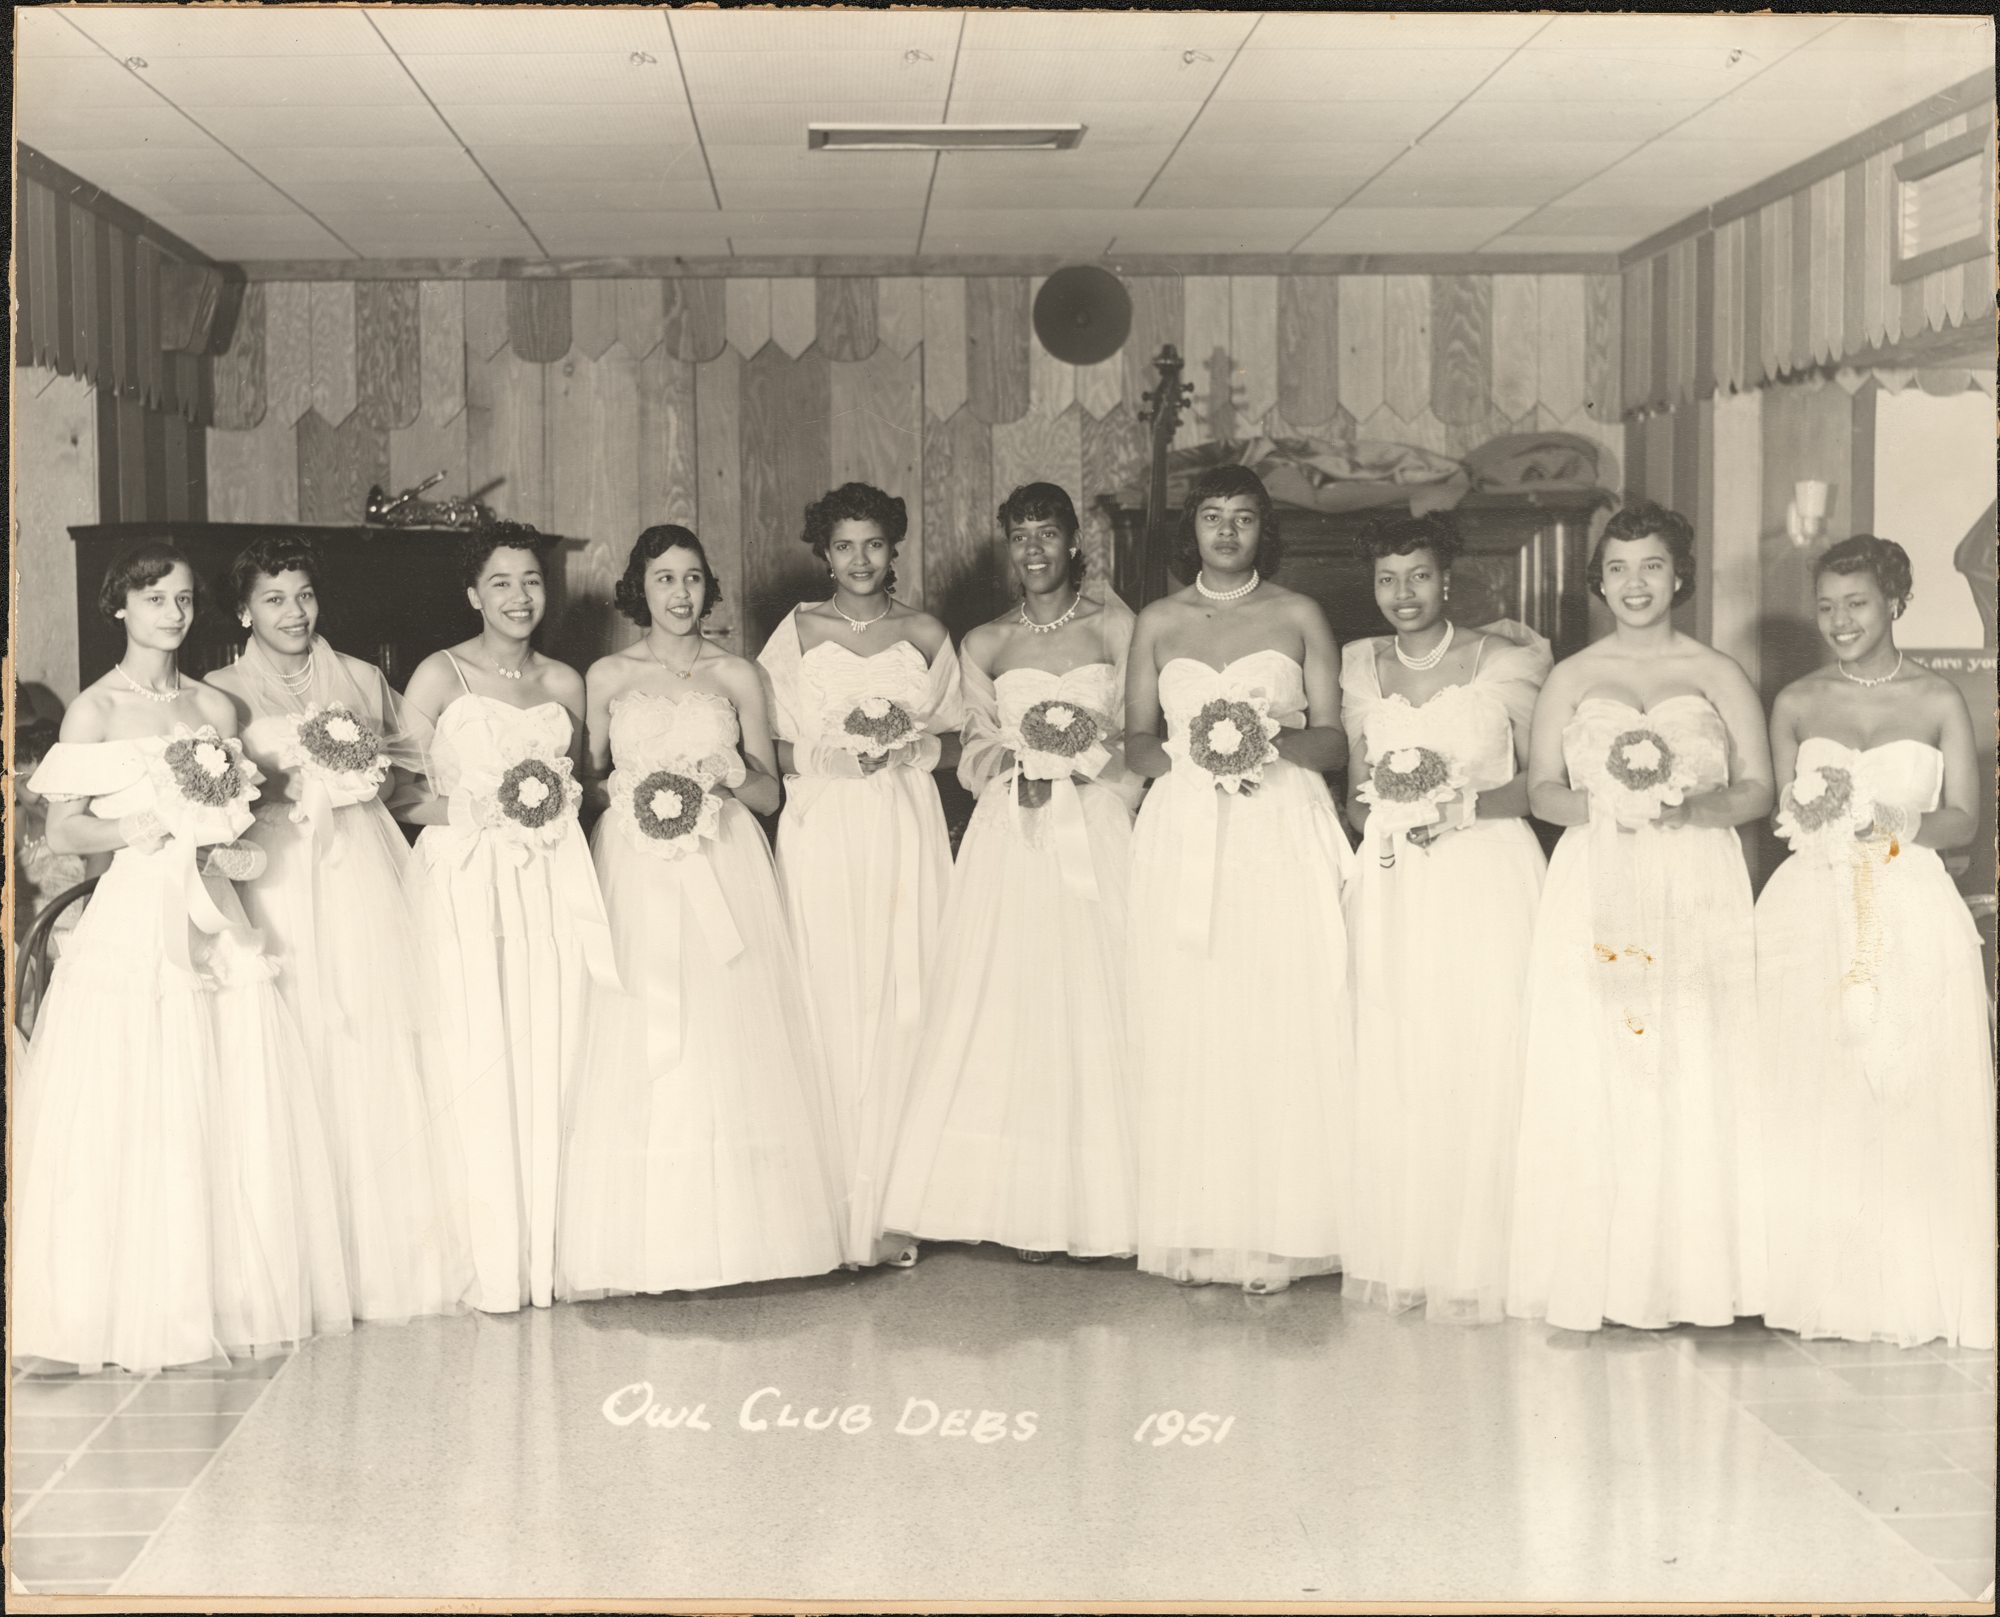 The Inaugural 1951 Debutantes of East and Manual High School